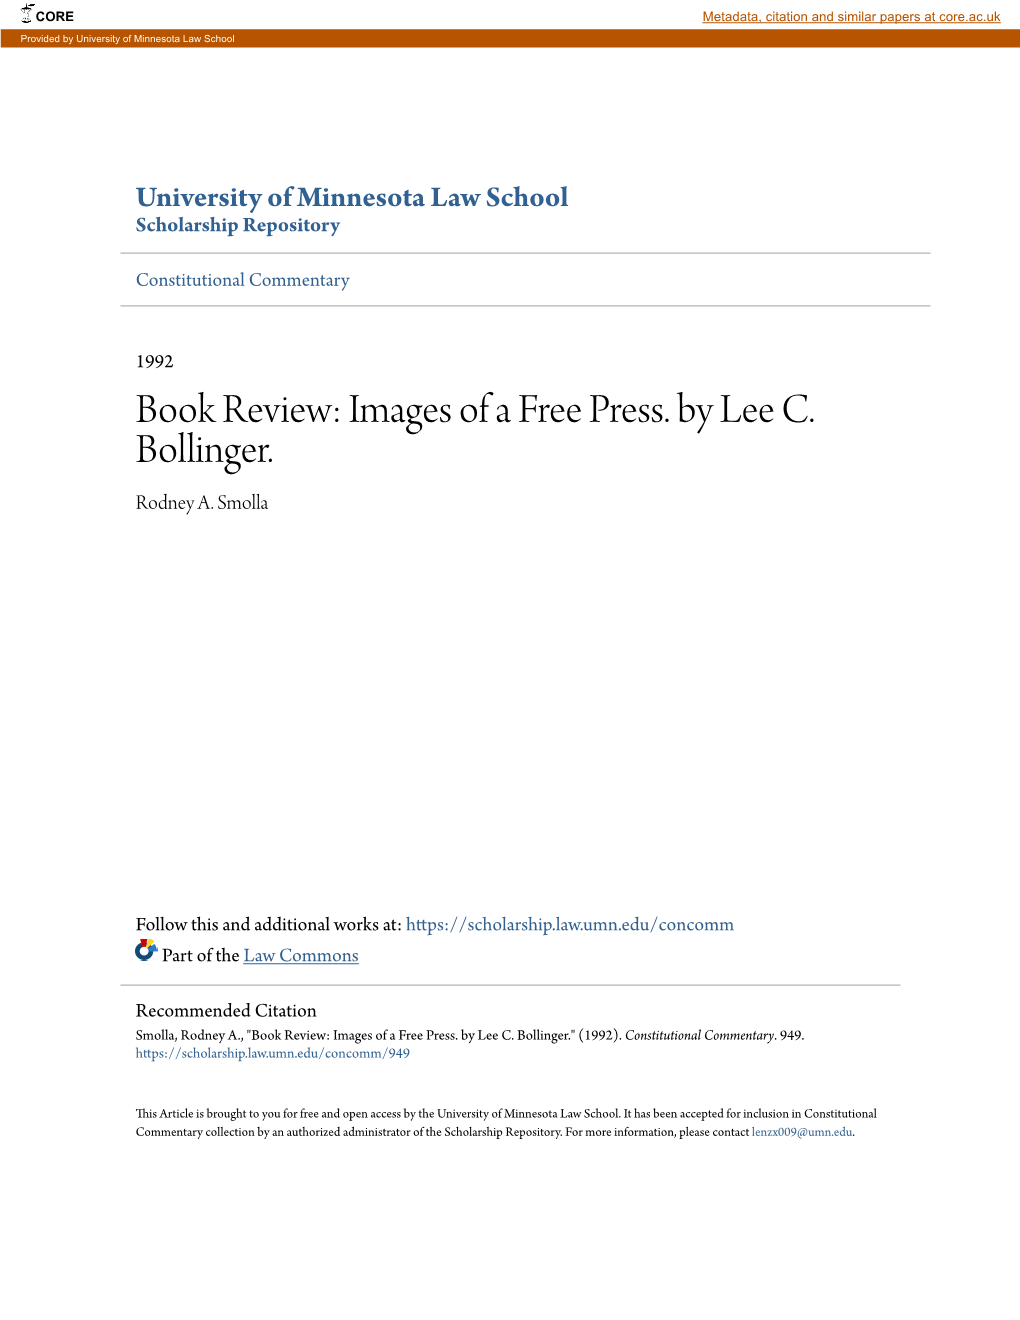 Images of a Free Press. by Lee C. Bollinger. Rodney A